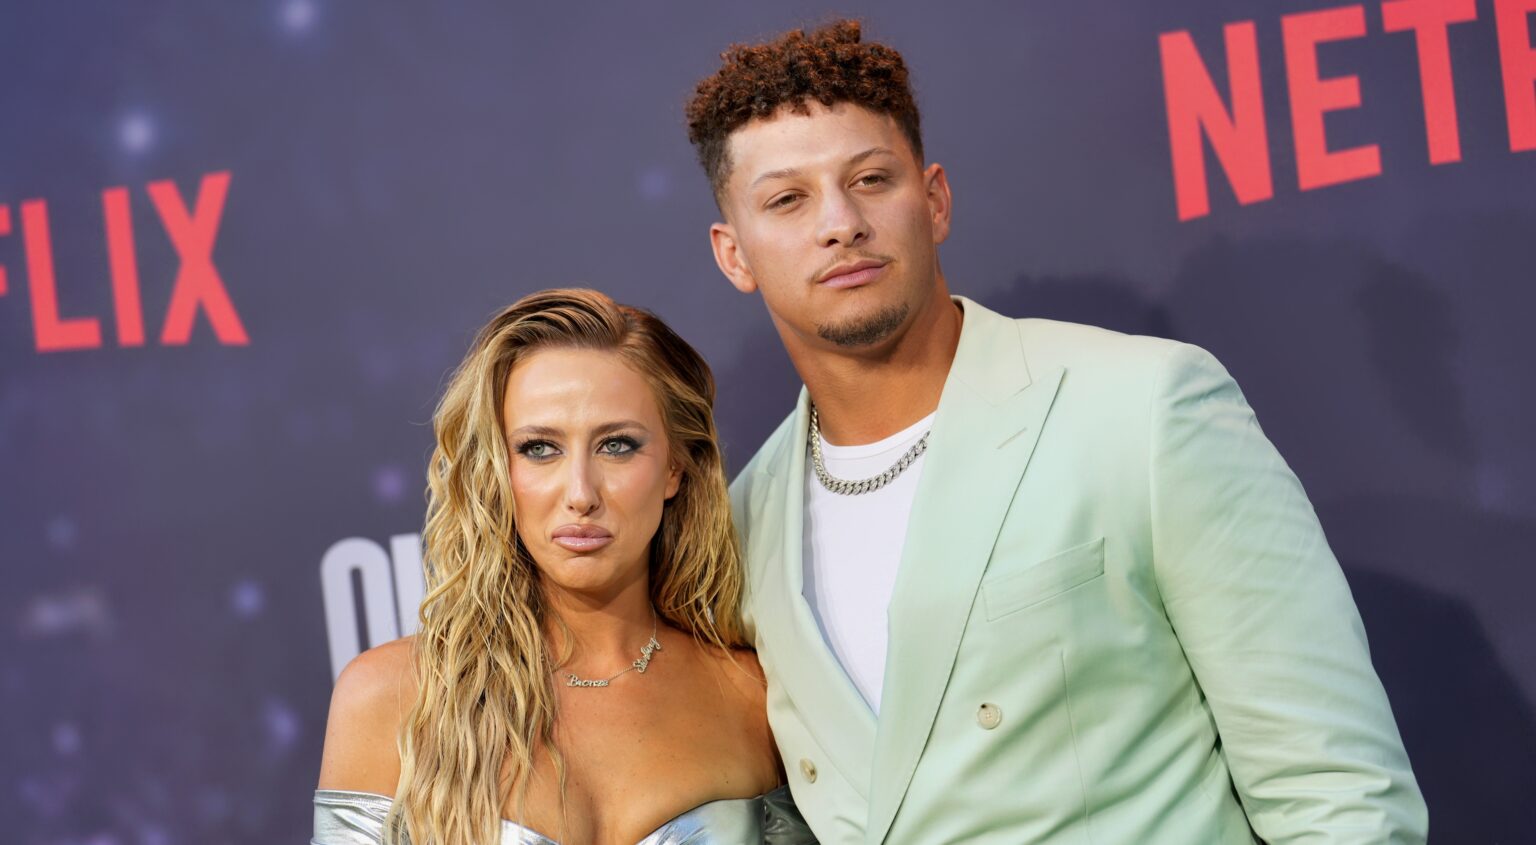 Sportsbook Drops Odds On Patrick Mahomes' Open Marriage